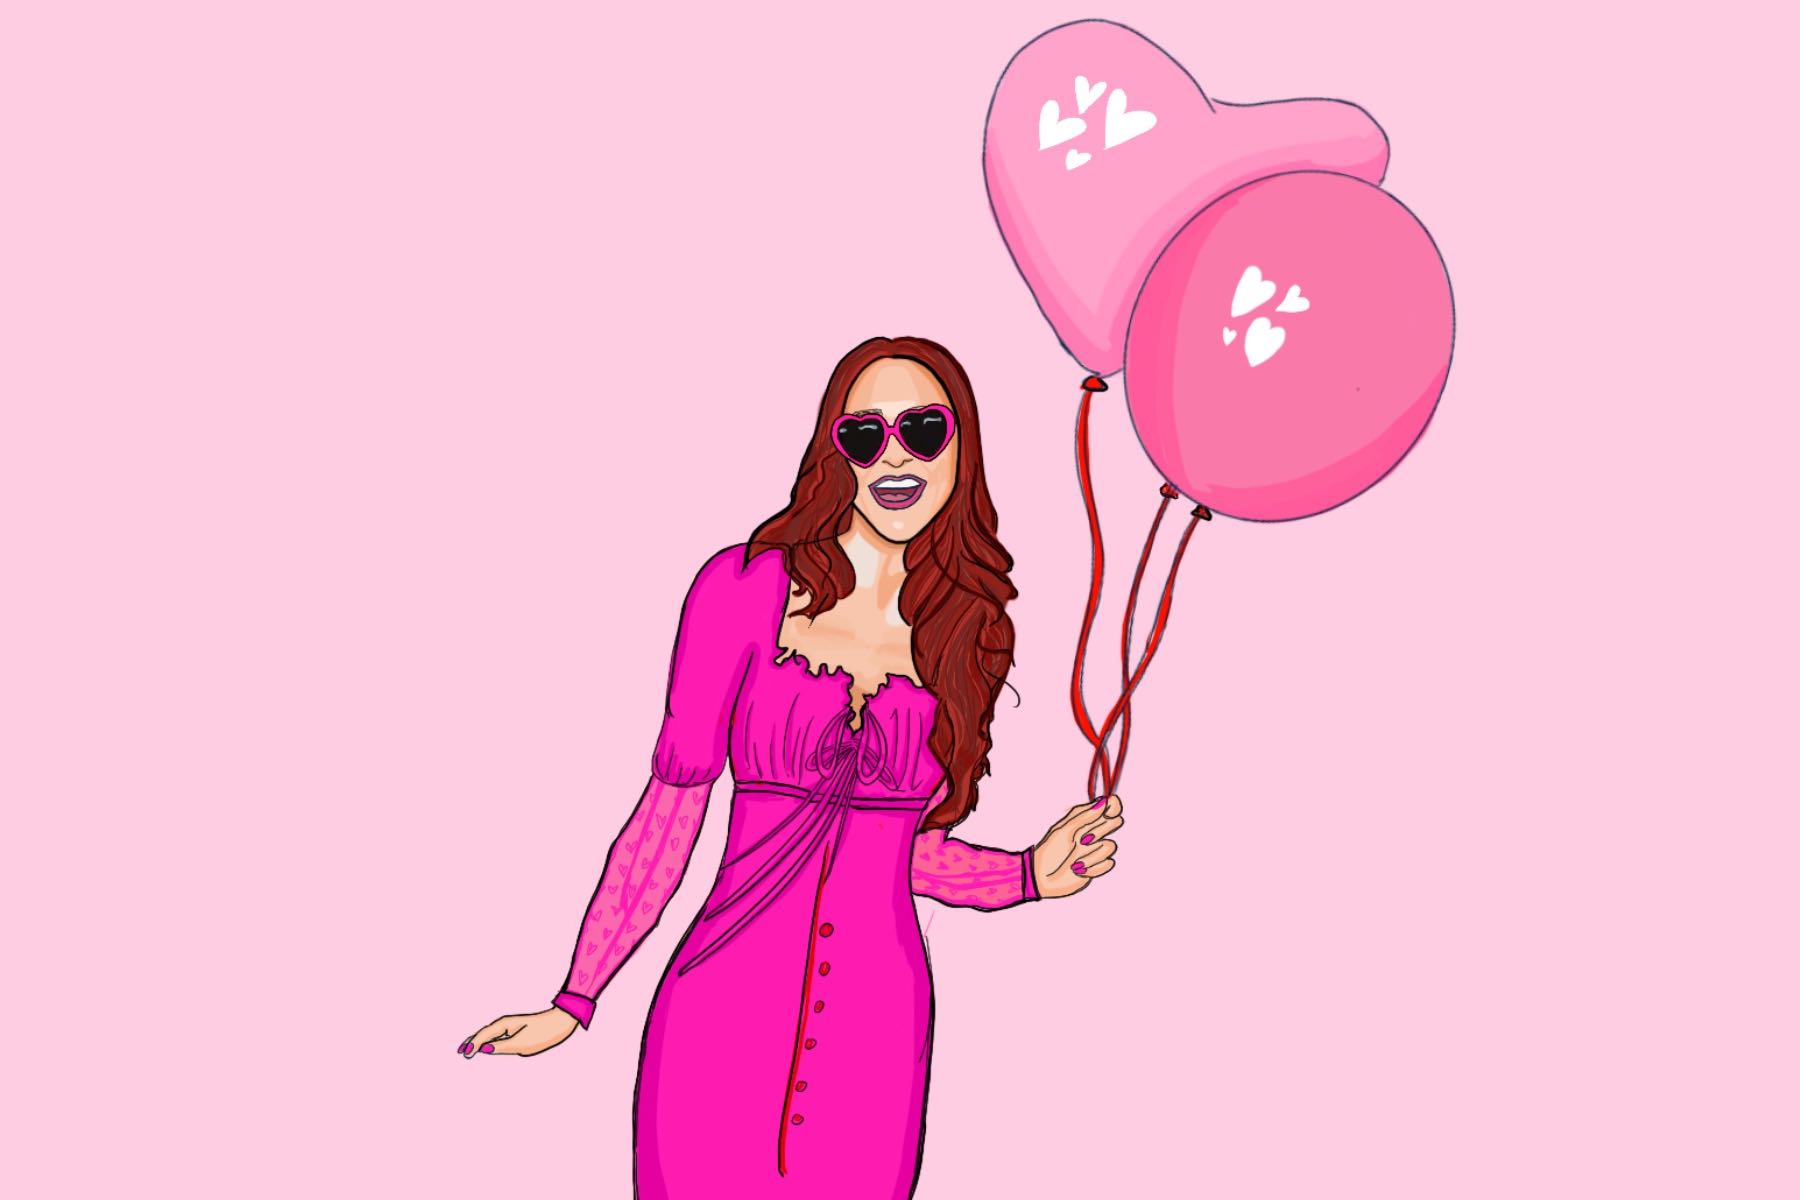 Illustration of woman with pink Galentine's Day balloons